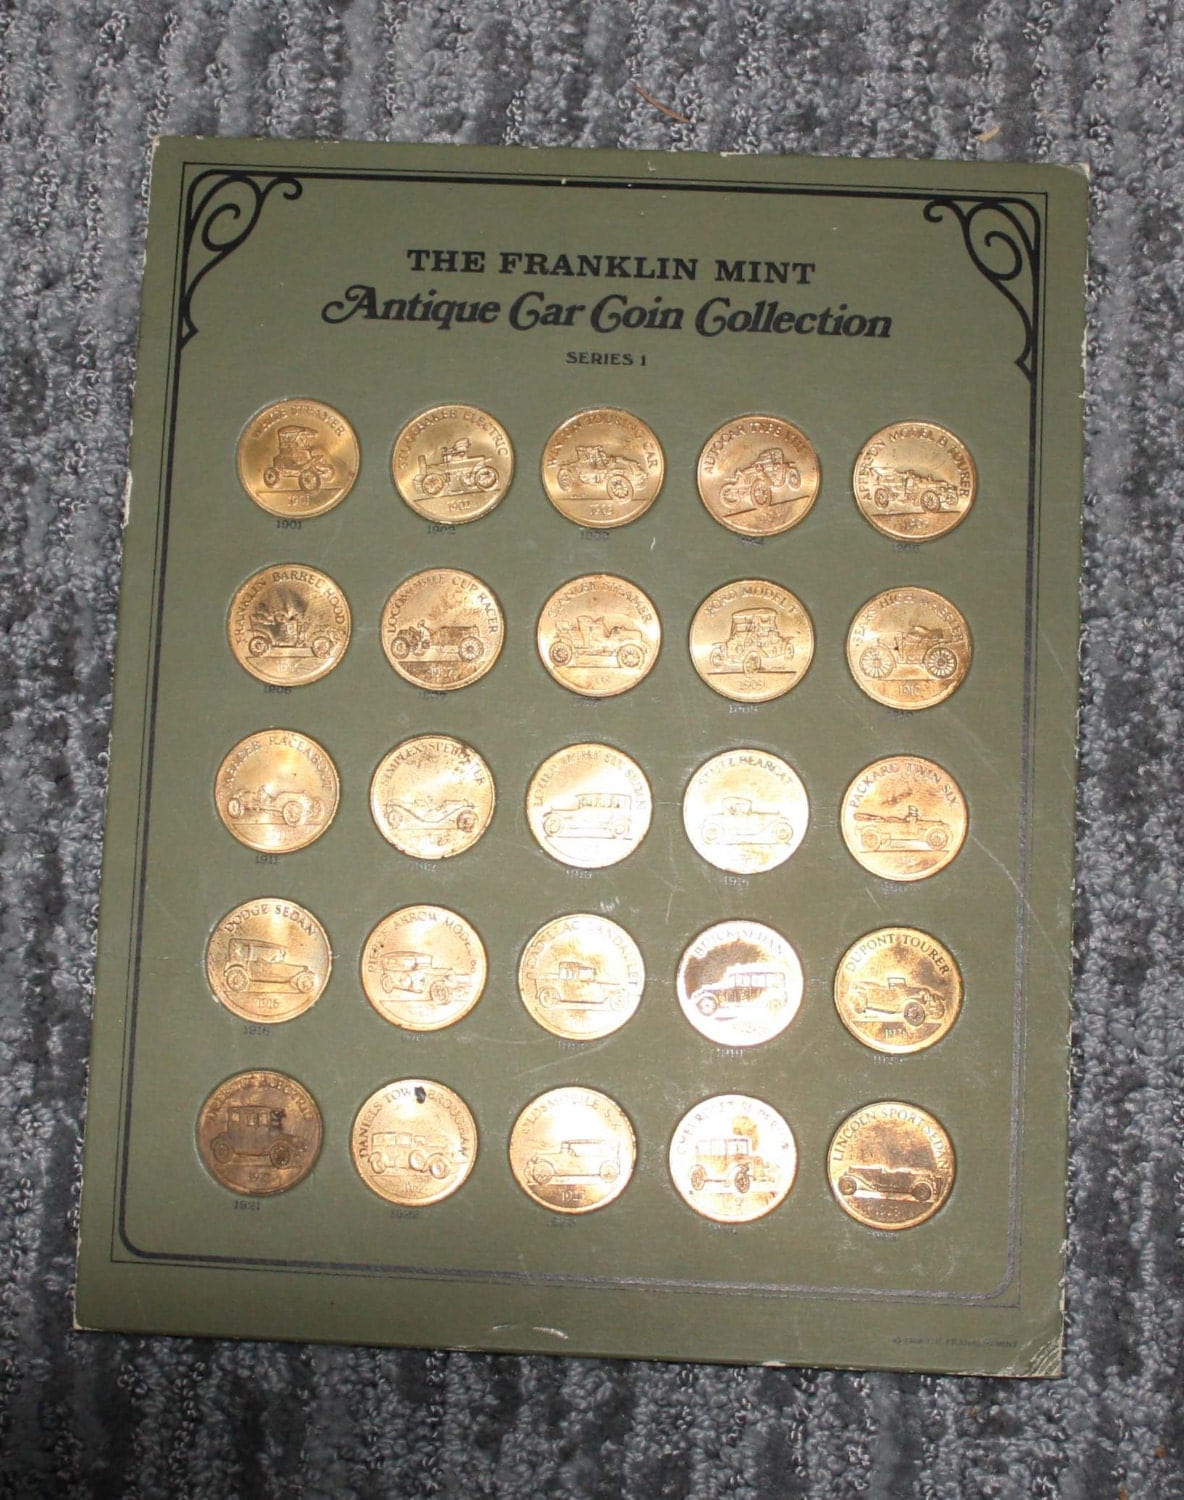 THE FRANKLIN MINT Antique Car Coin Collection Series 1